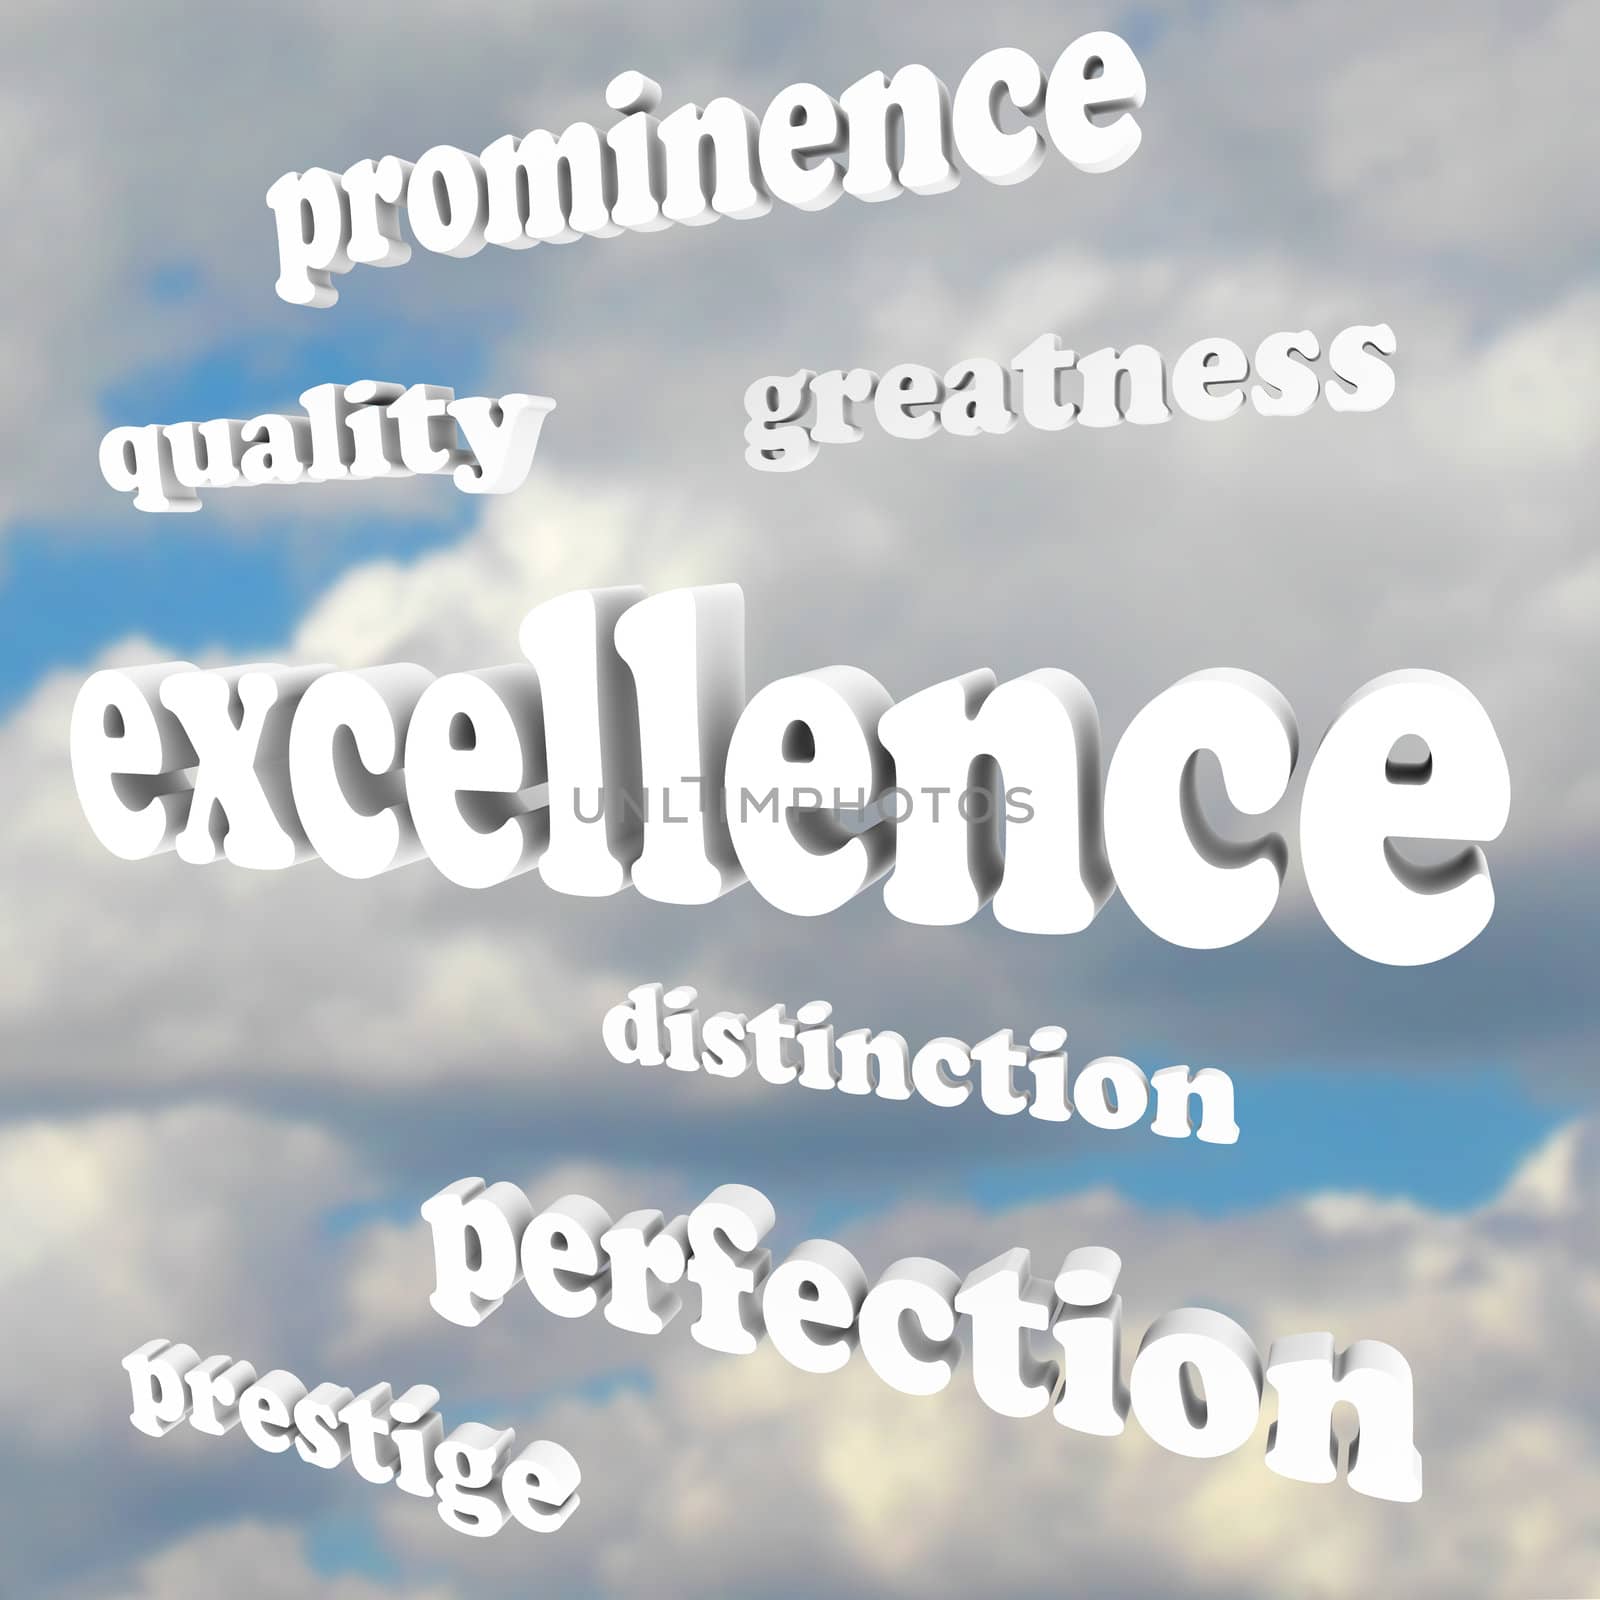 The word excellence and related terms describing distinction, greatness, quality, prominence, perfection and prestige -- words floating in a blue cloudy sky